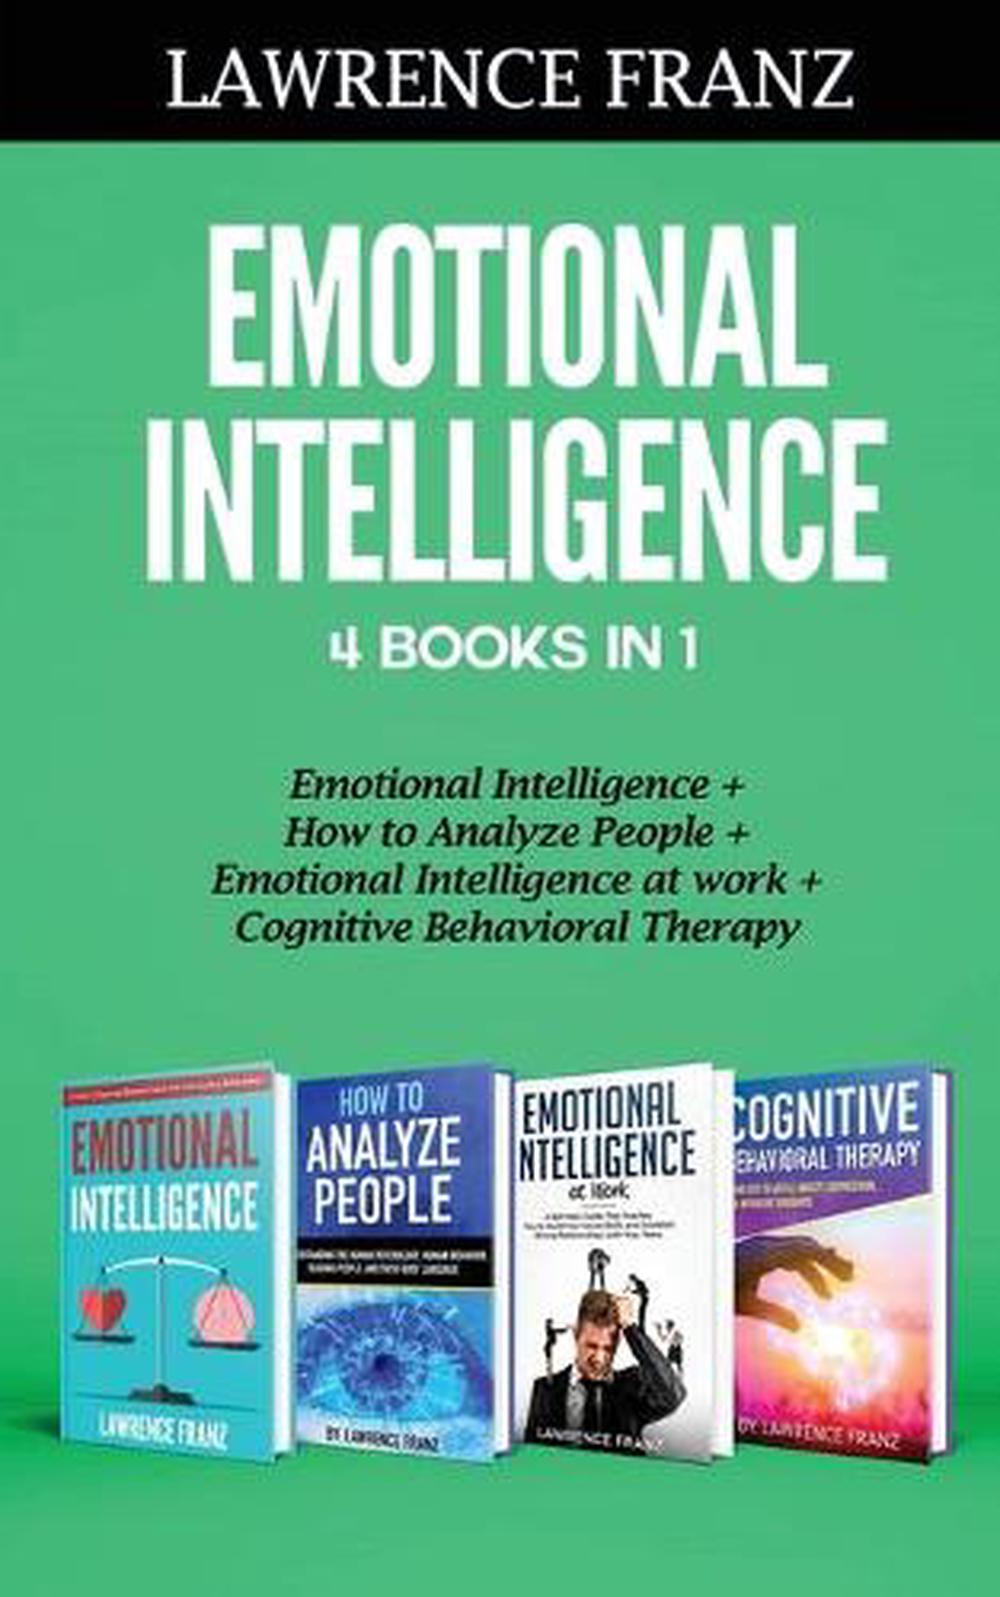 book review emotional intelligence